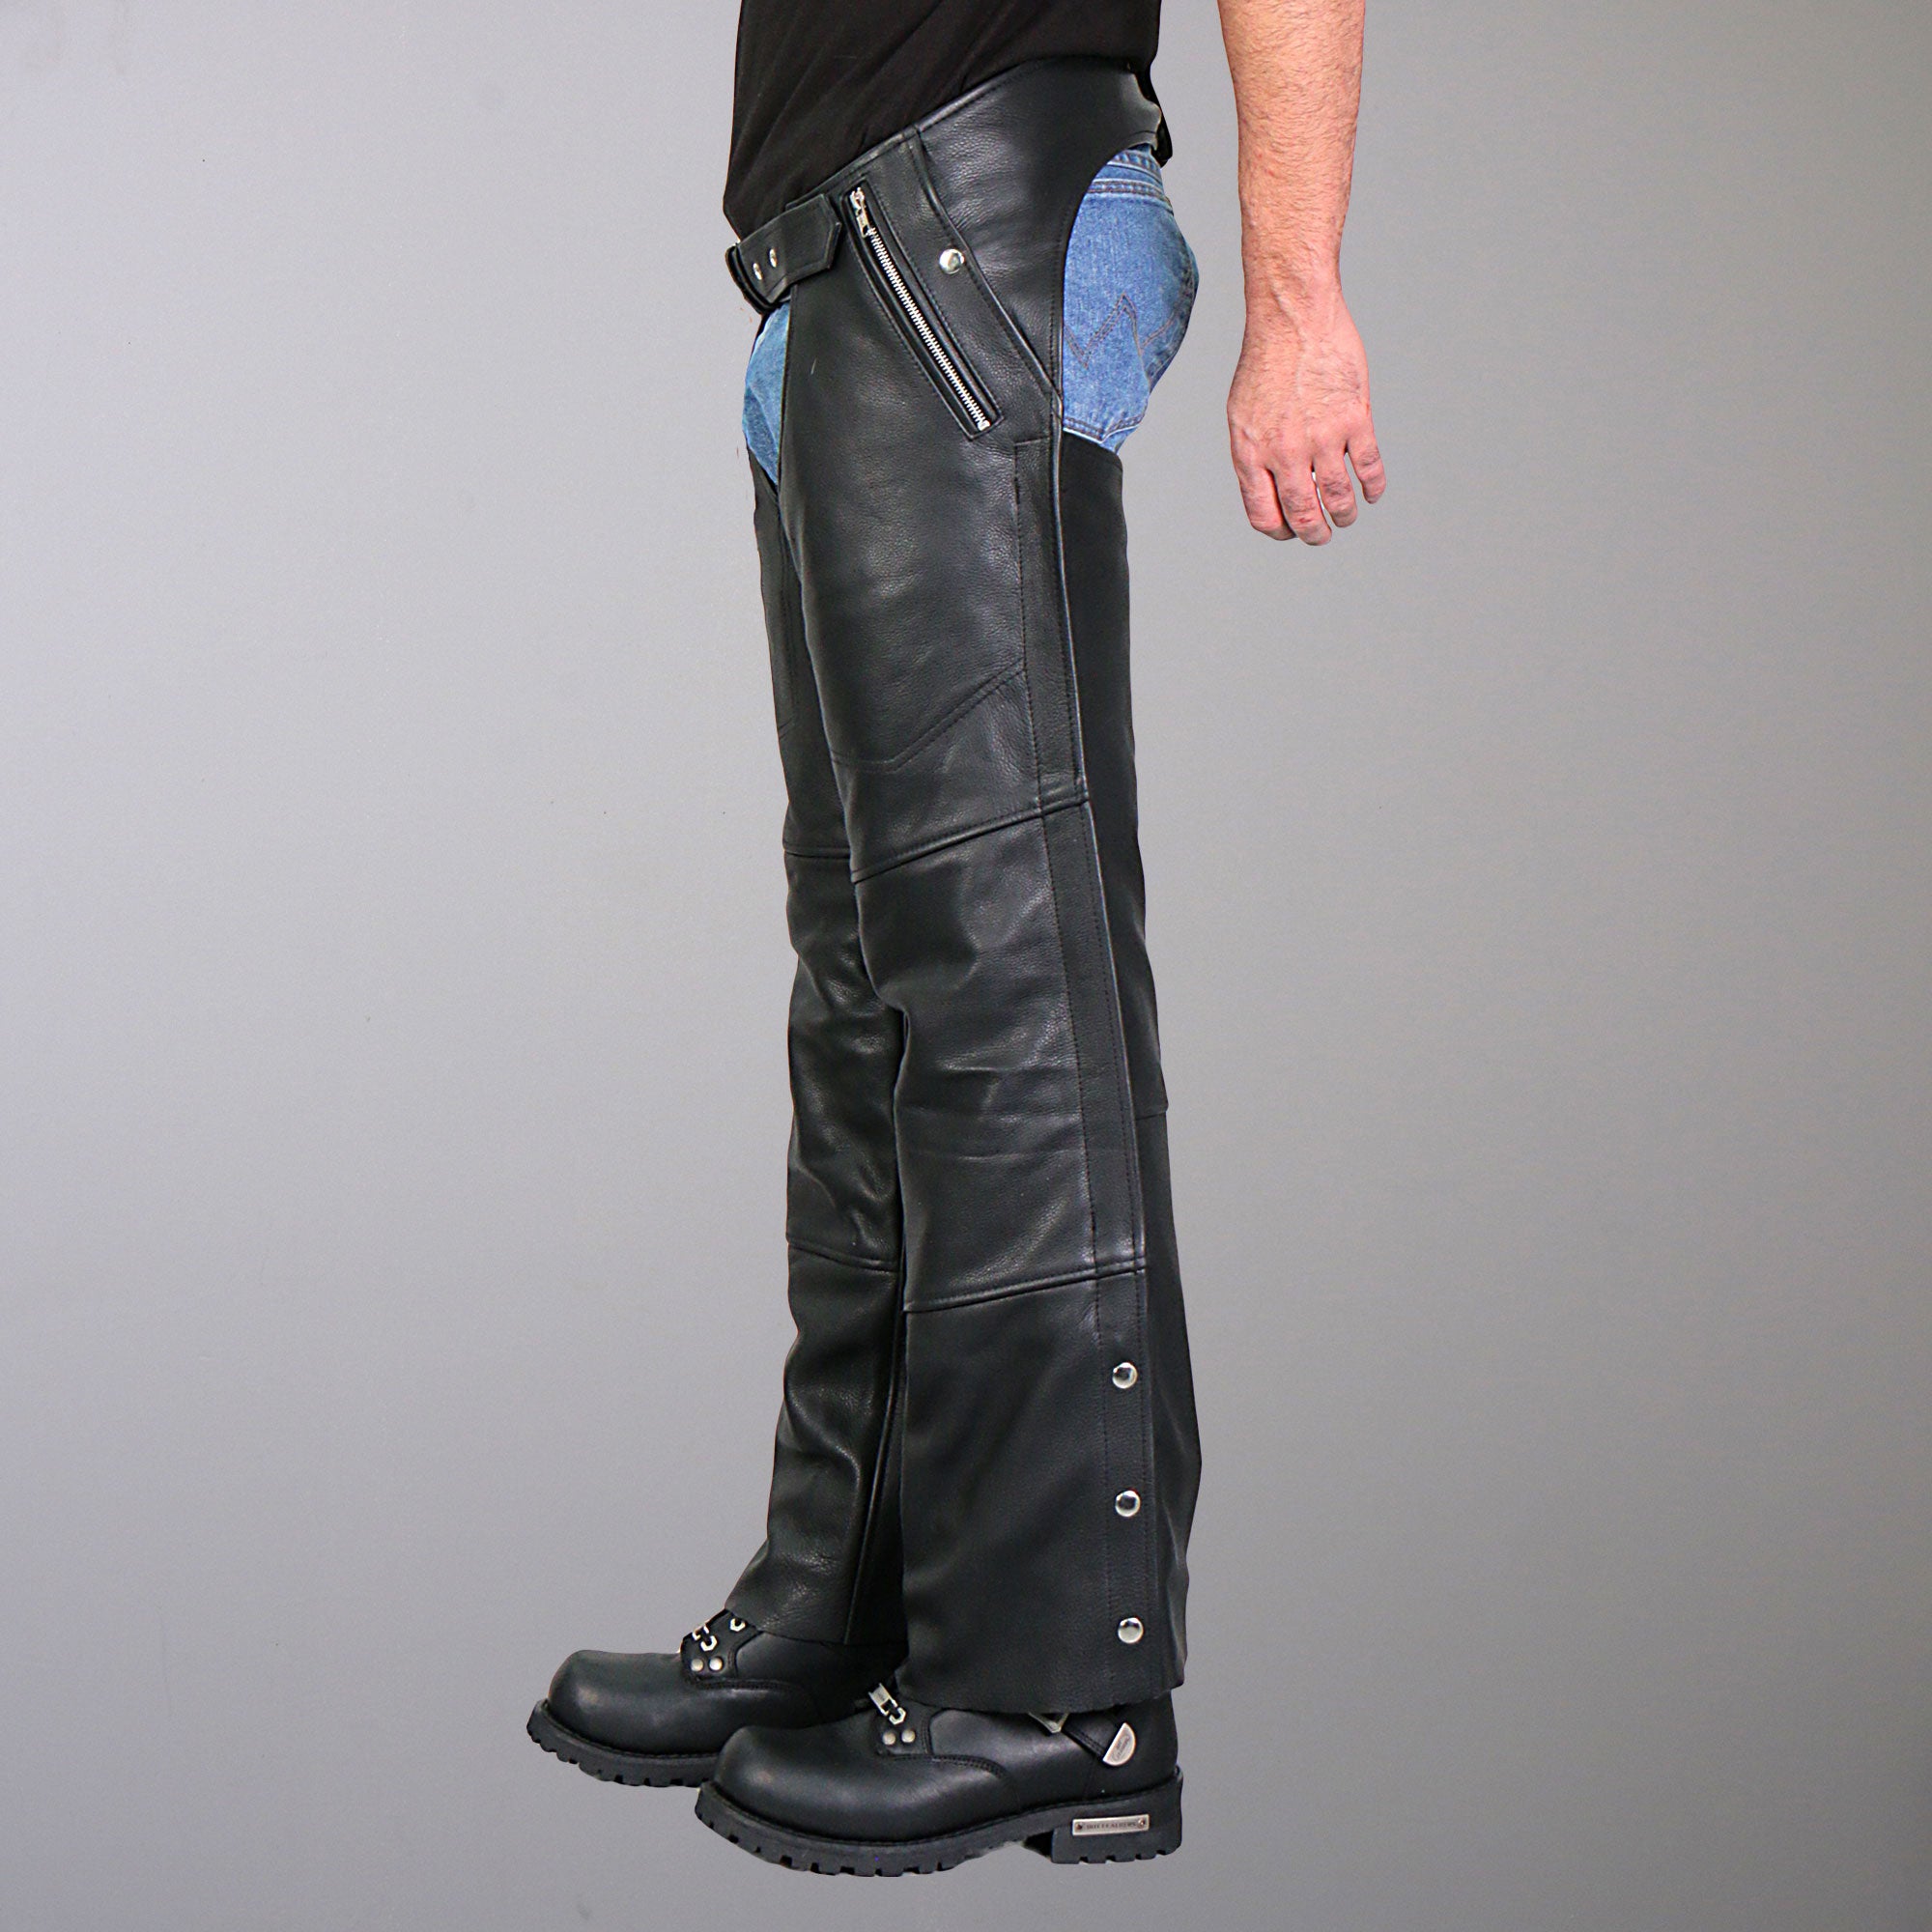 Harley Davidson Black Leather Motorcycle Chaps Trousers for Bikers